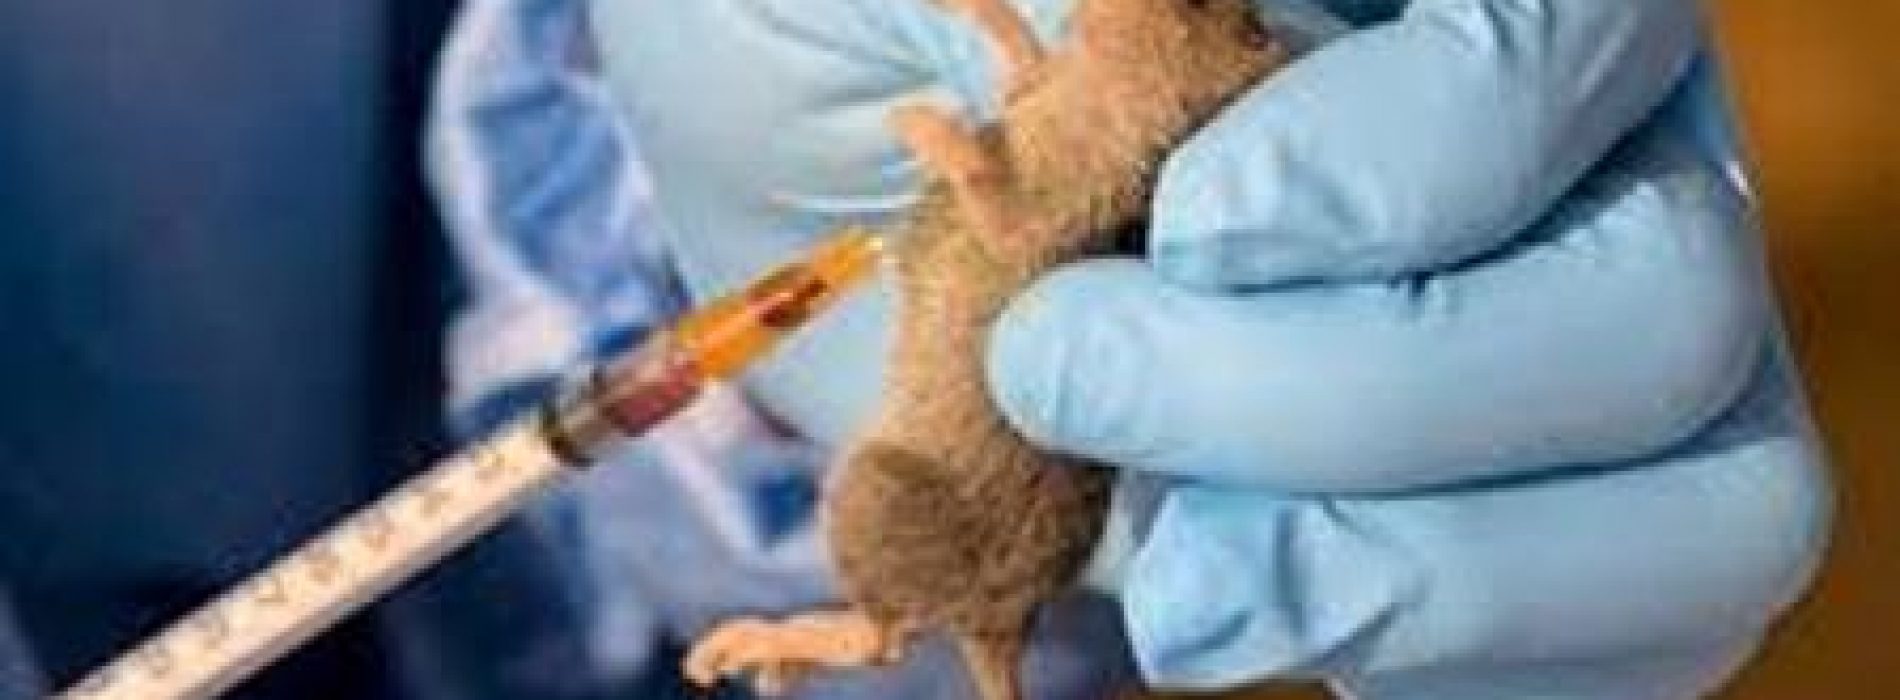 Lassa fever: Death toll now 29, 195 confirmed cases